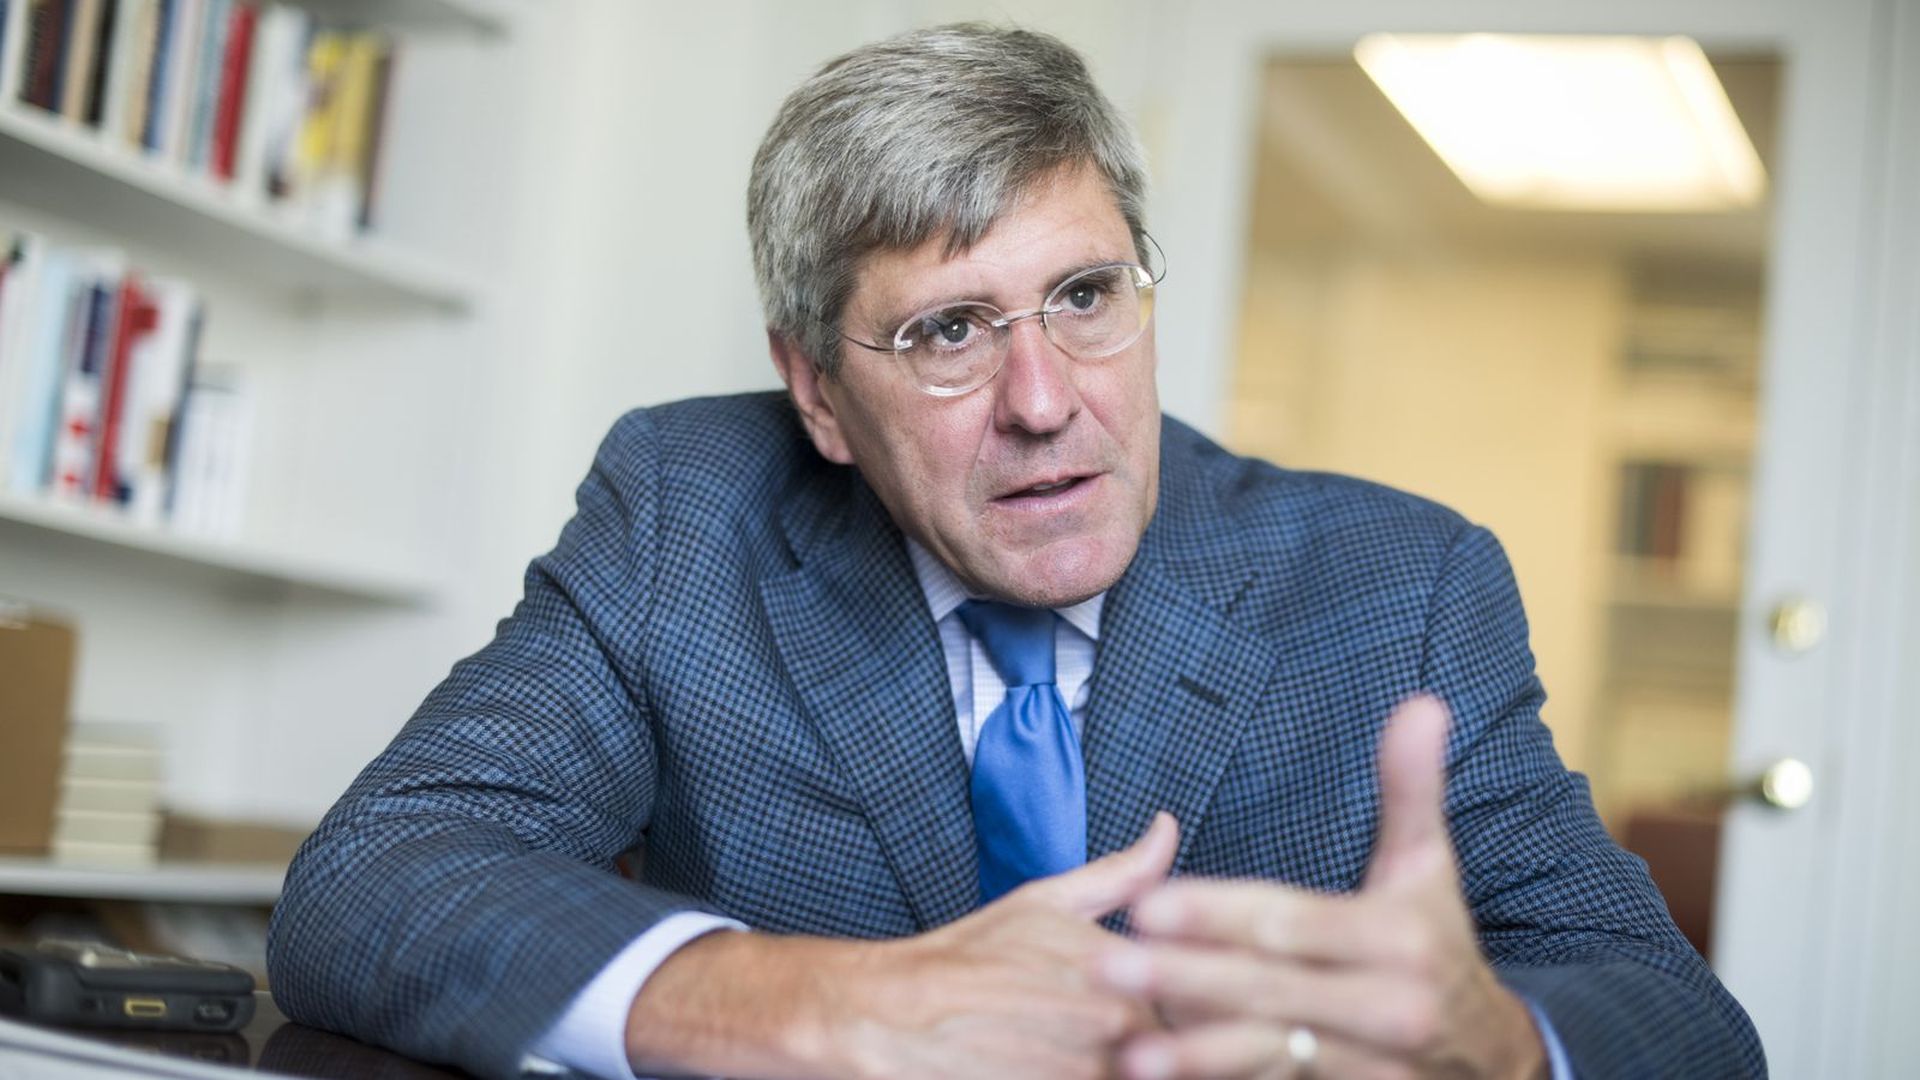 Stephen Moore has apologized for his controversial comments.